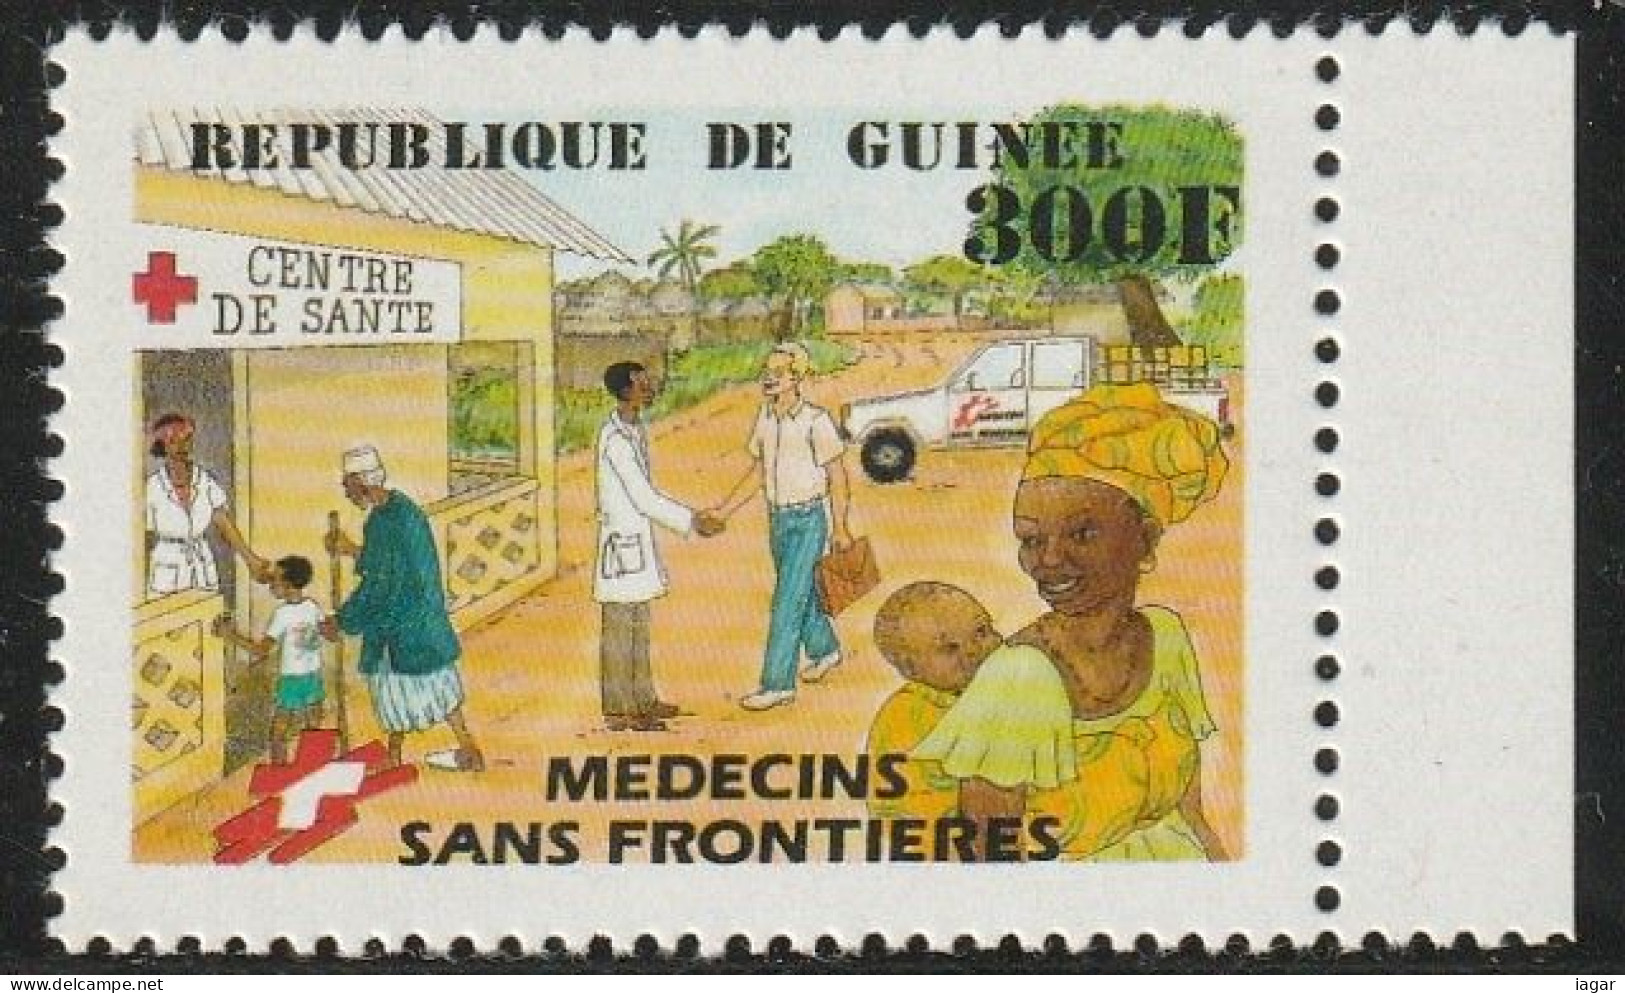 THEMATIC  "MEDECINS SANS FRONTIERES"  - GUINEE - First Aid